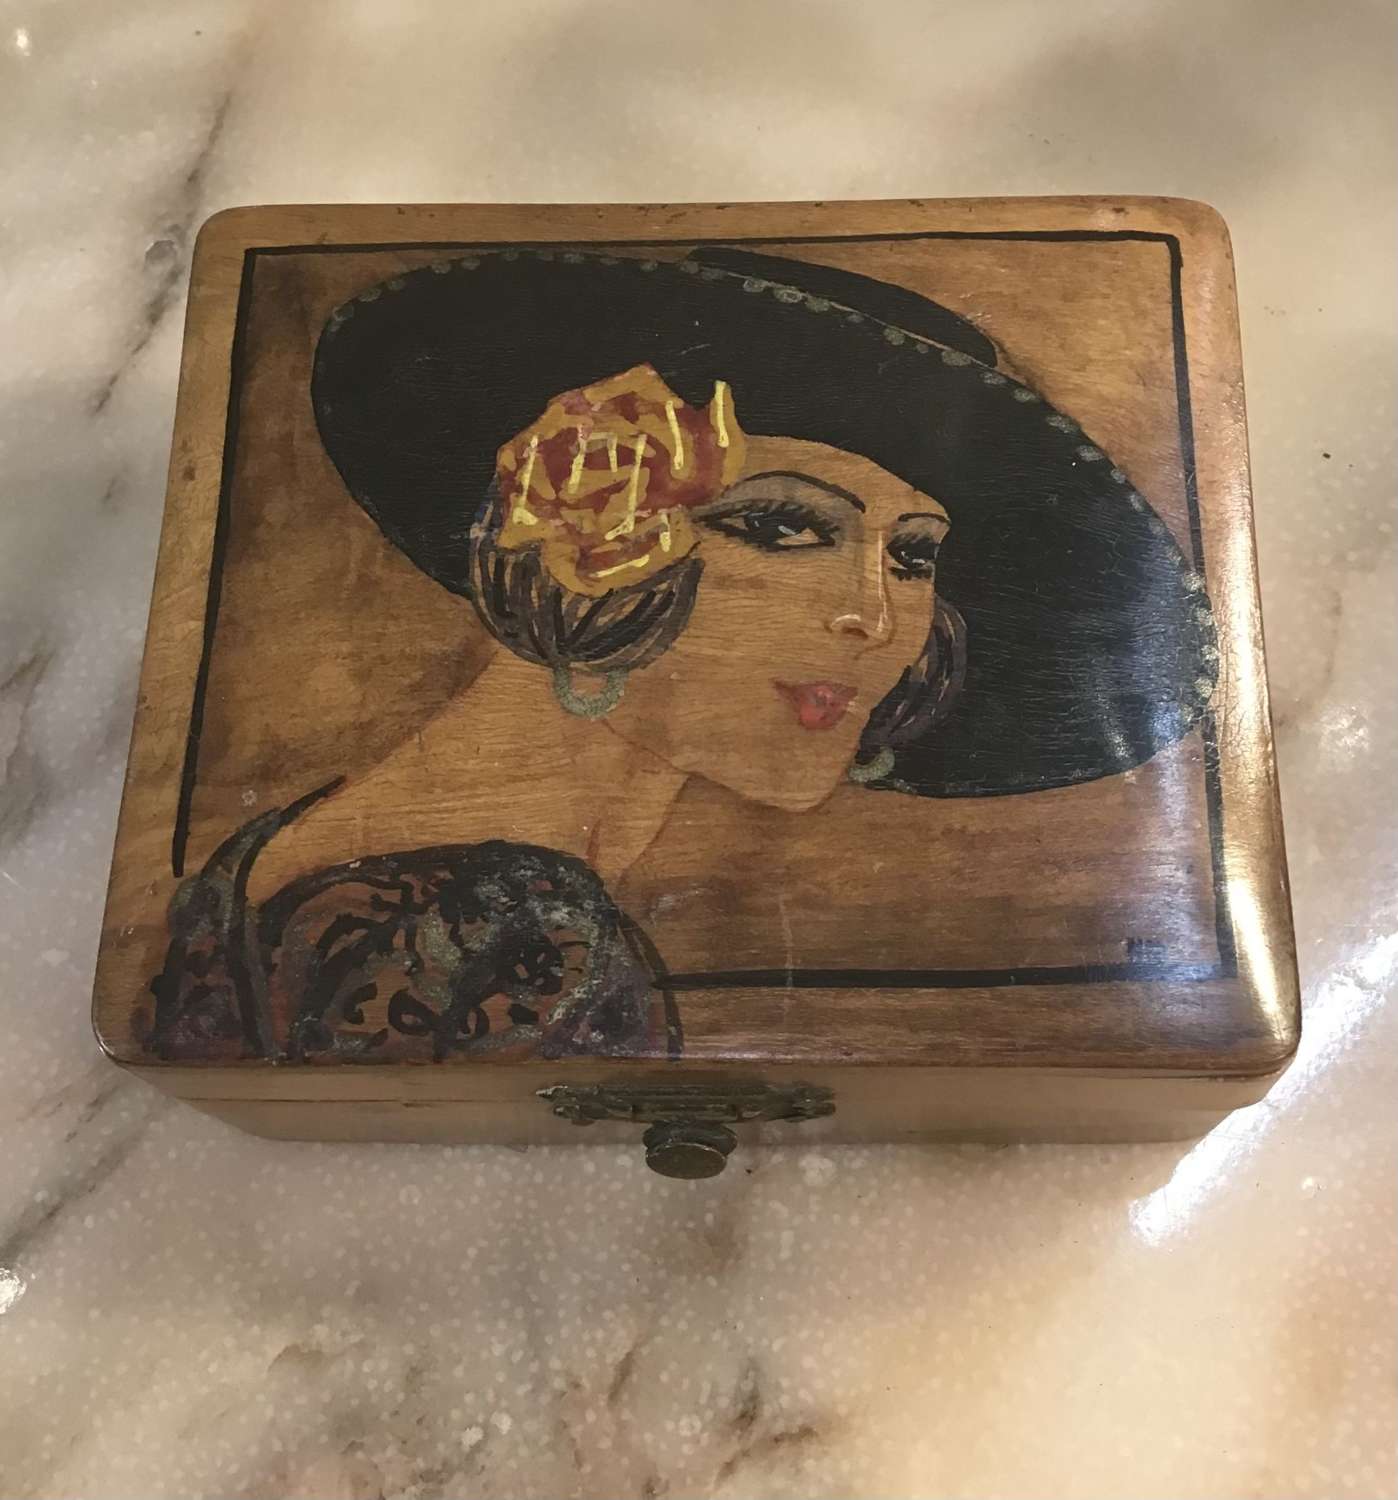 Vintage wooden box decorated with lady in a hat